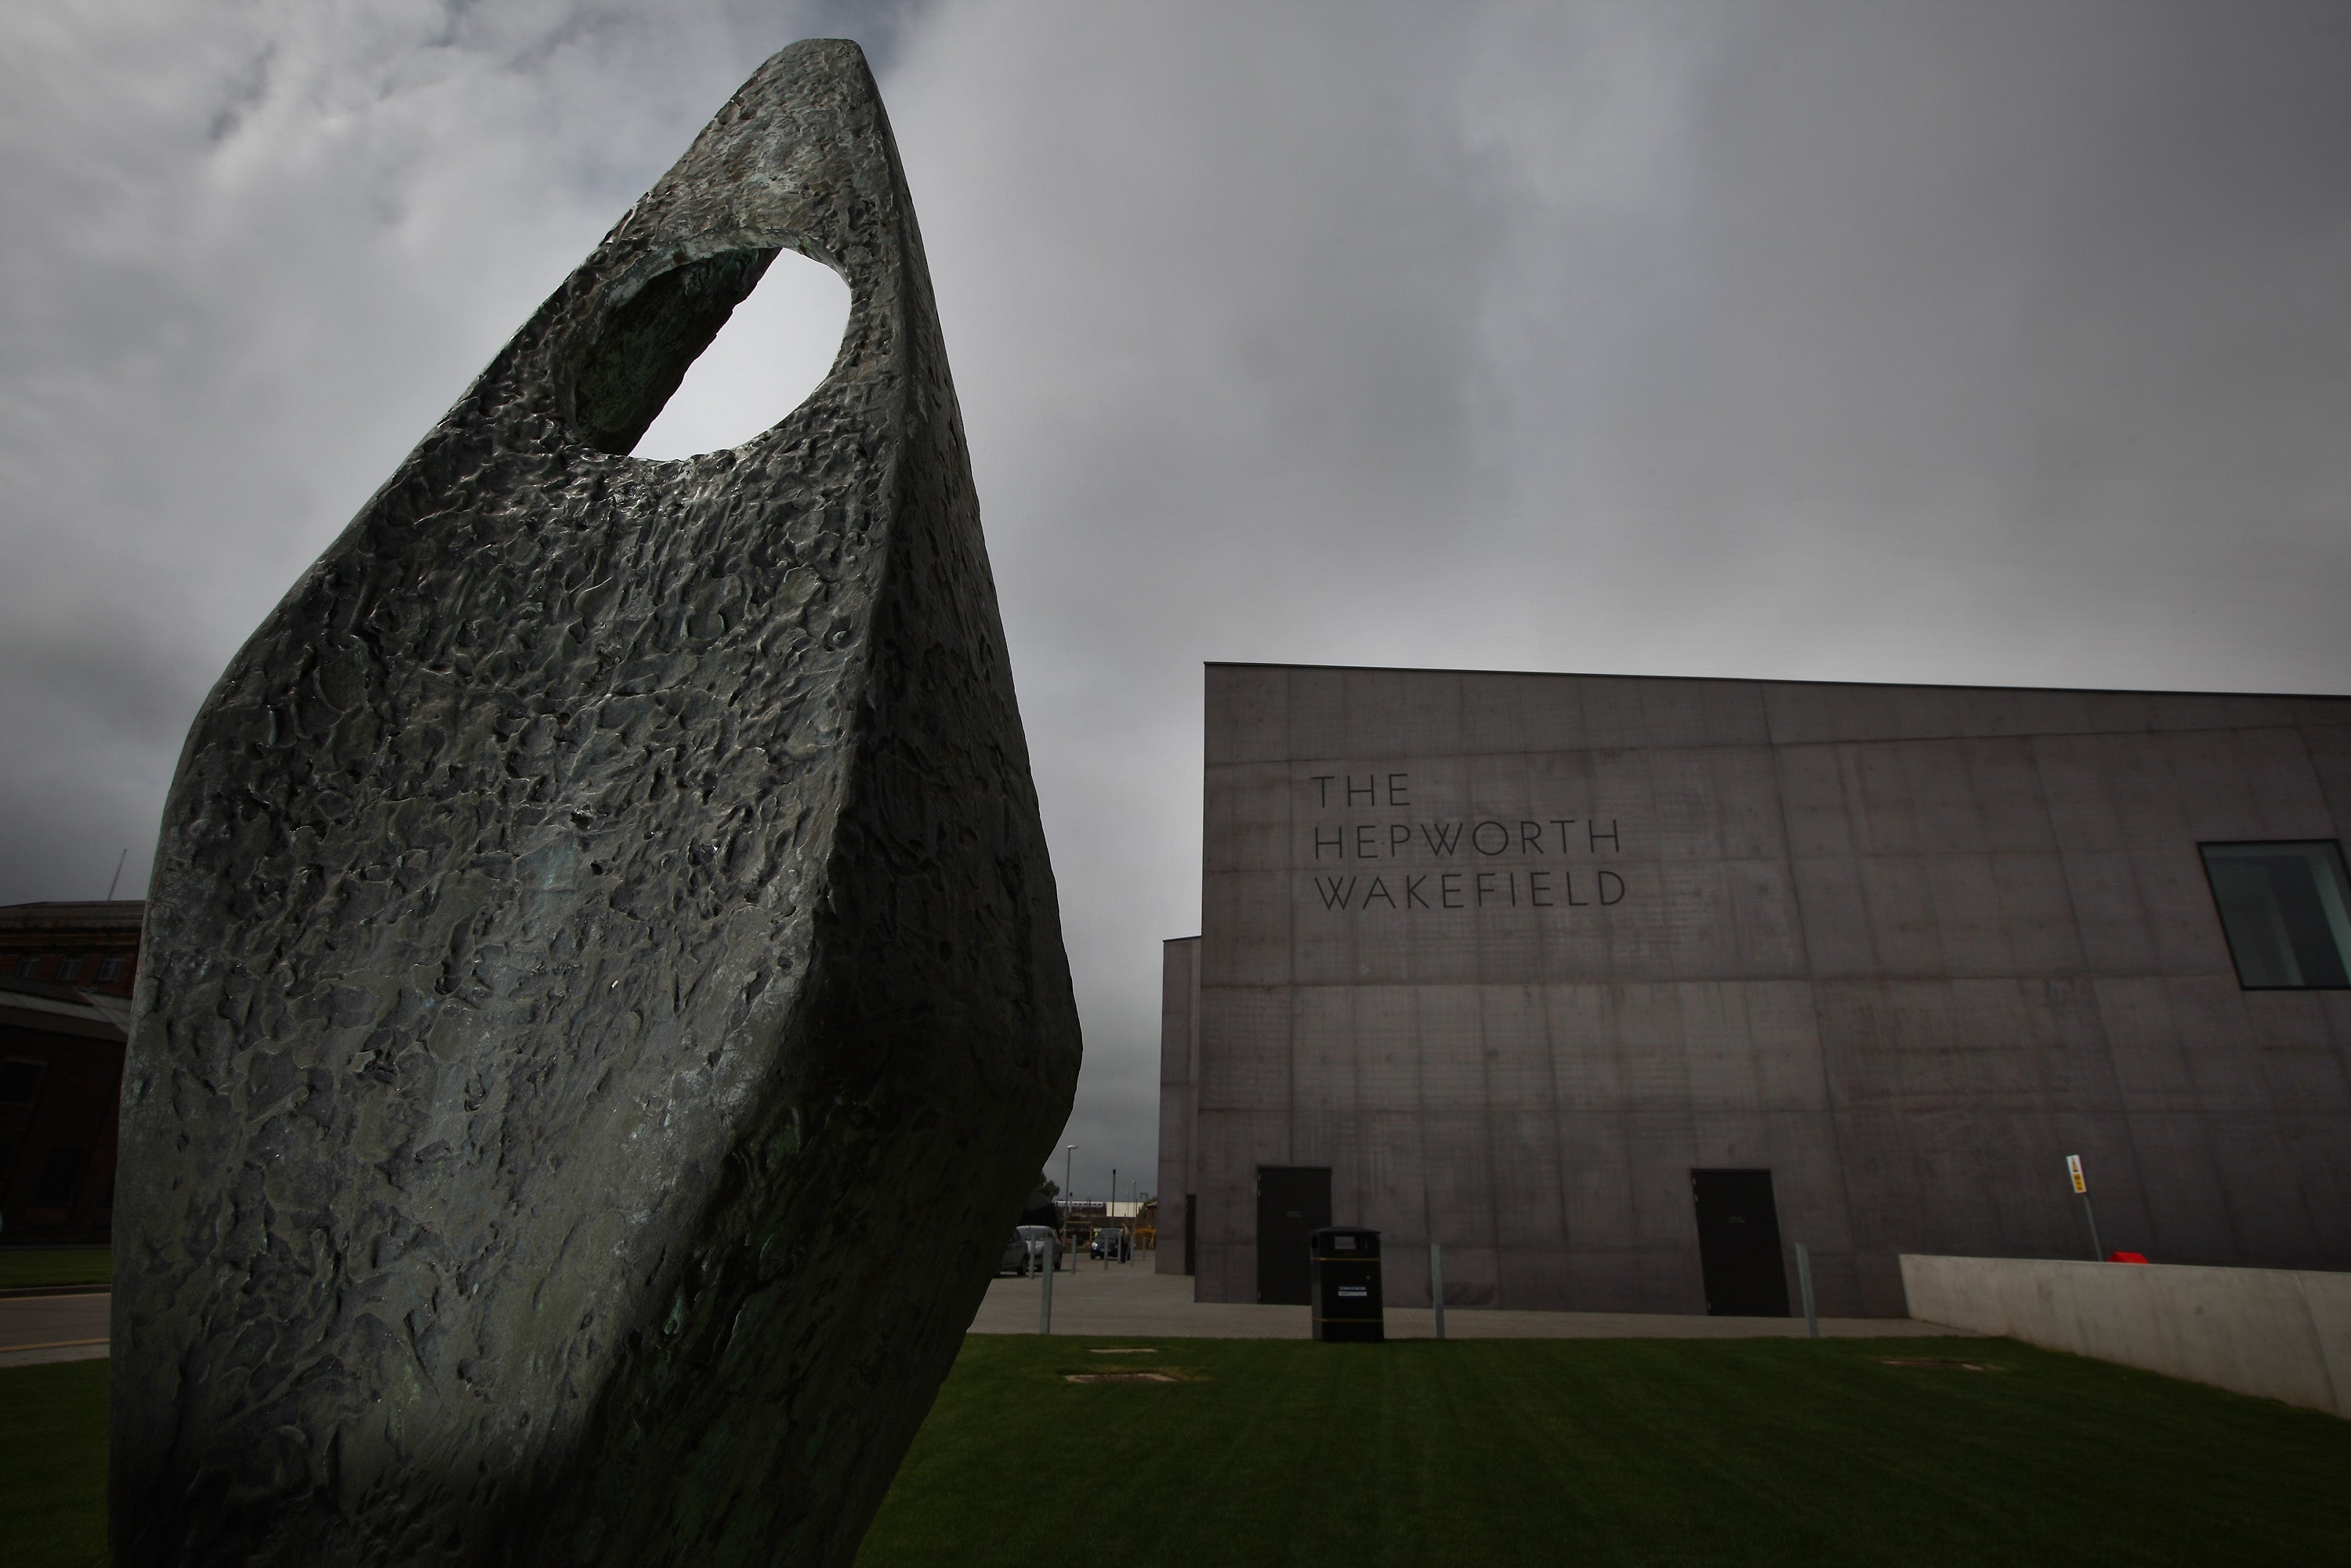 The Hepworth Wakefield will host a Barbara Hepworth retrospective from 21 May to 27 February 2022